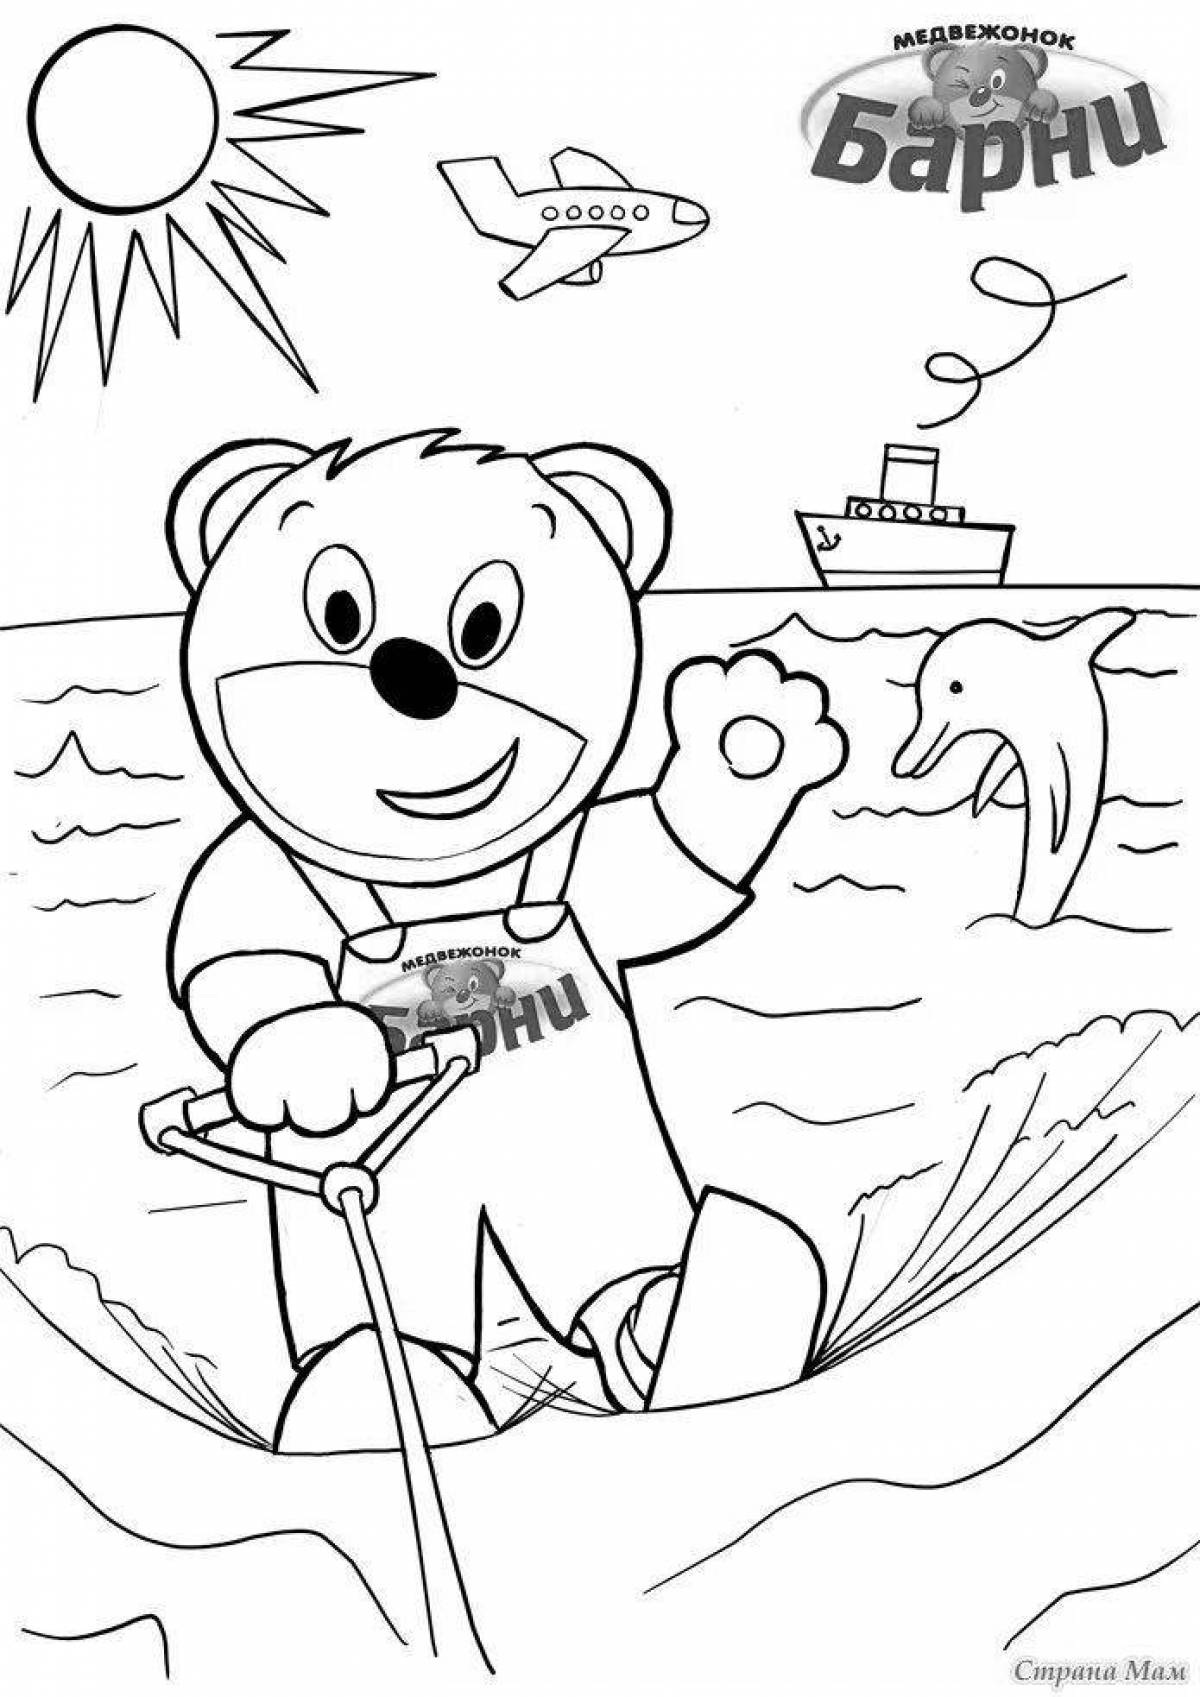 Charming barney coloring page